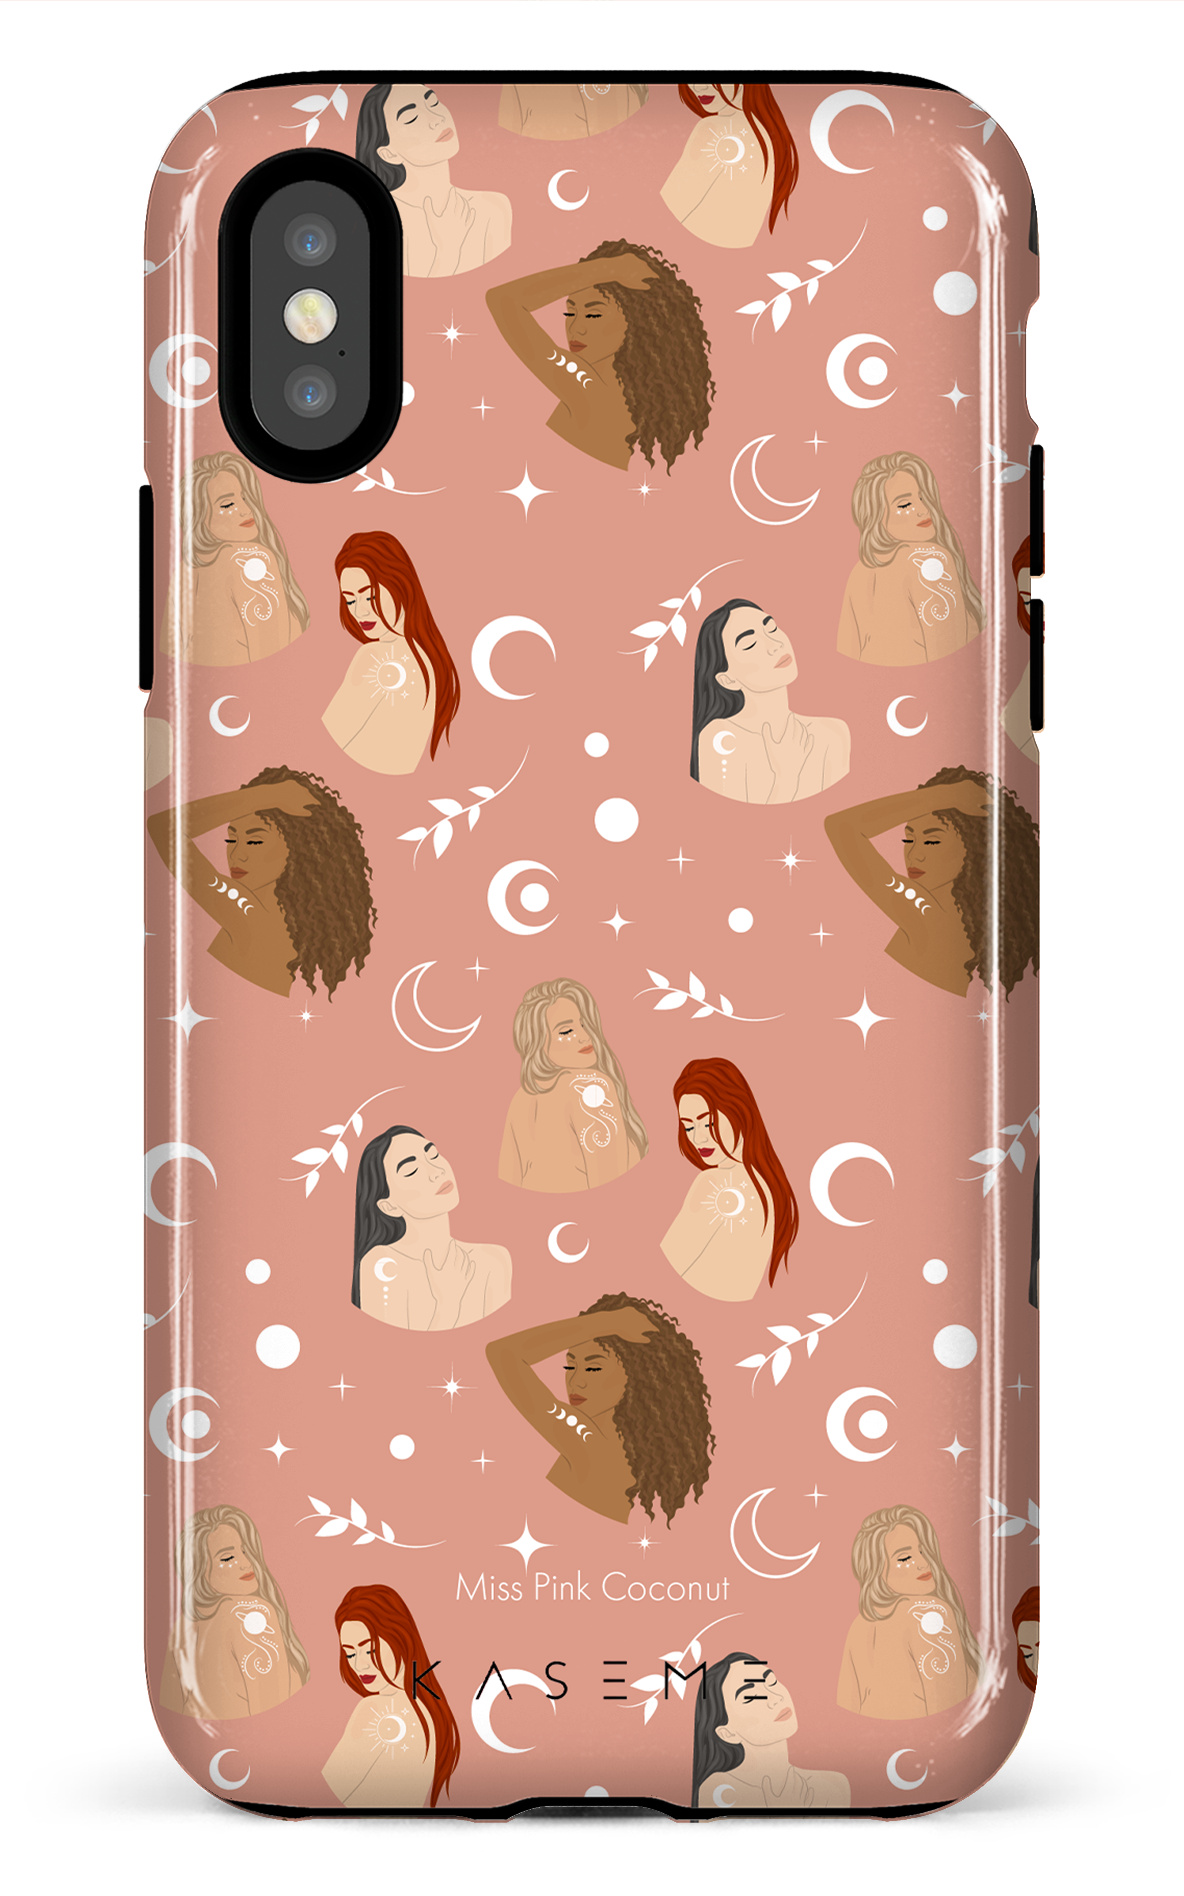 Celestial Dream by Miss Pink Coconut - iPhone X/Xs